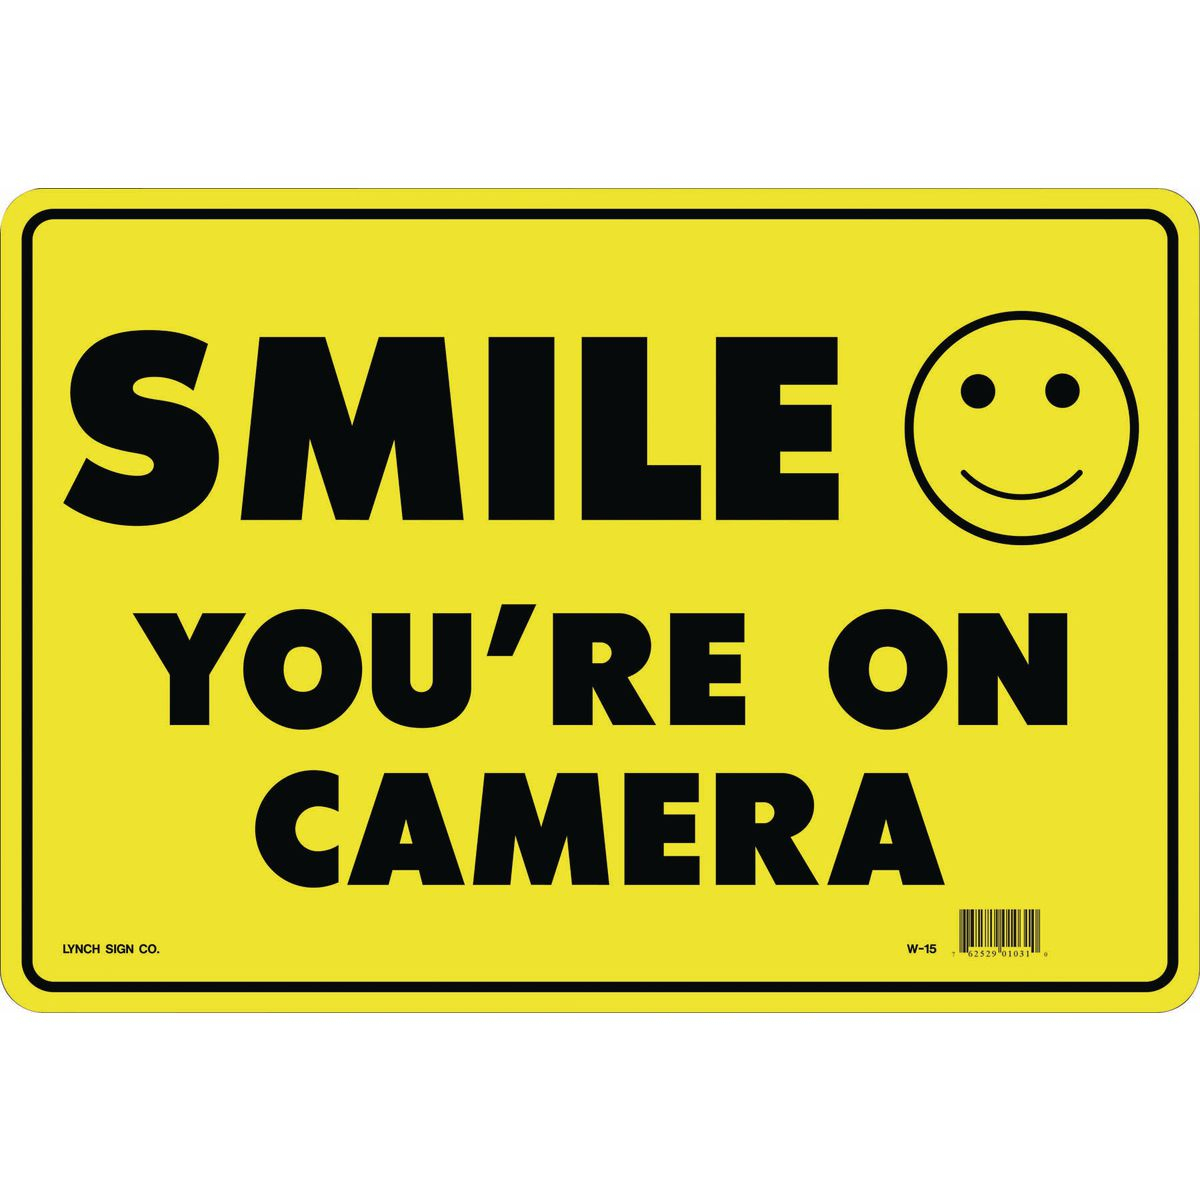 Smile you re on camera sign printable free